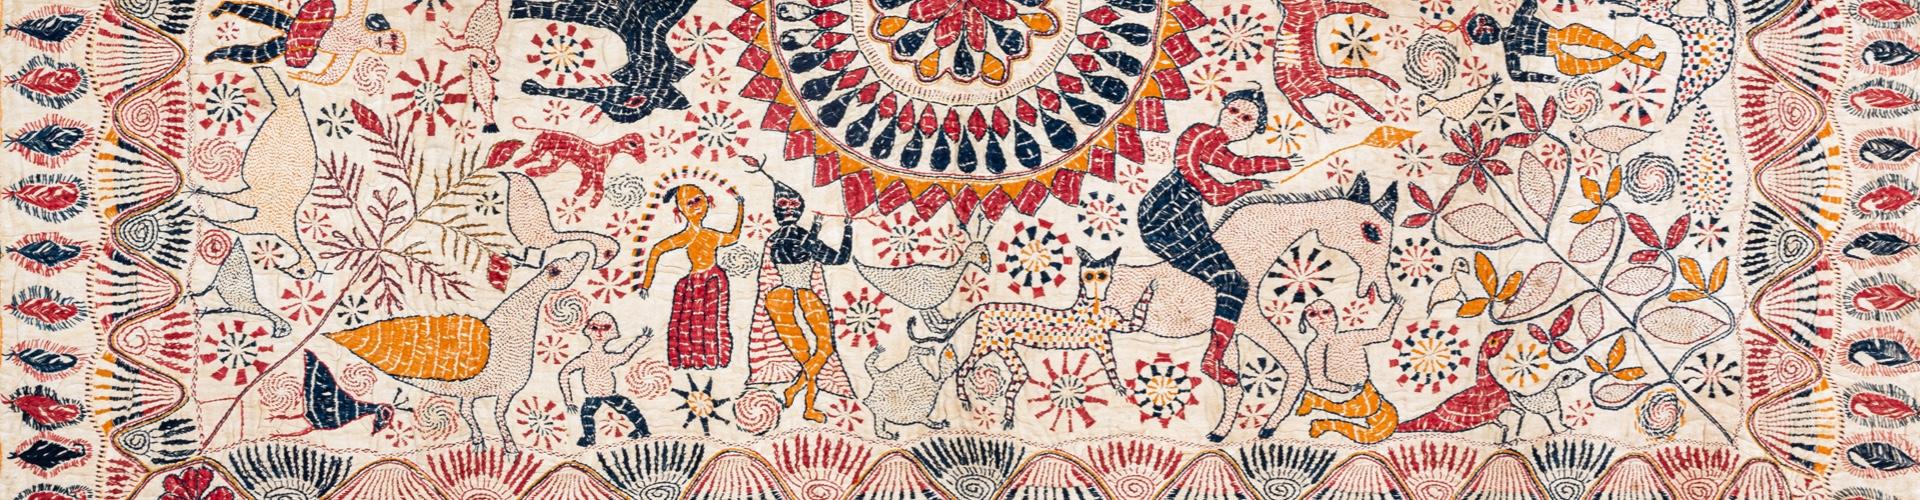 Human and bird figures in kantha stitch